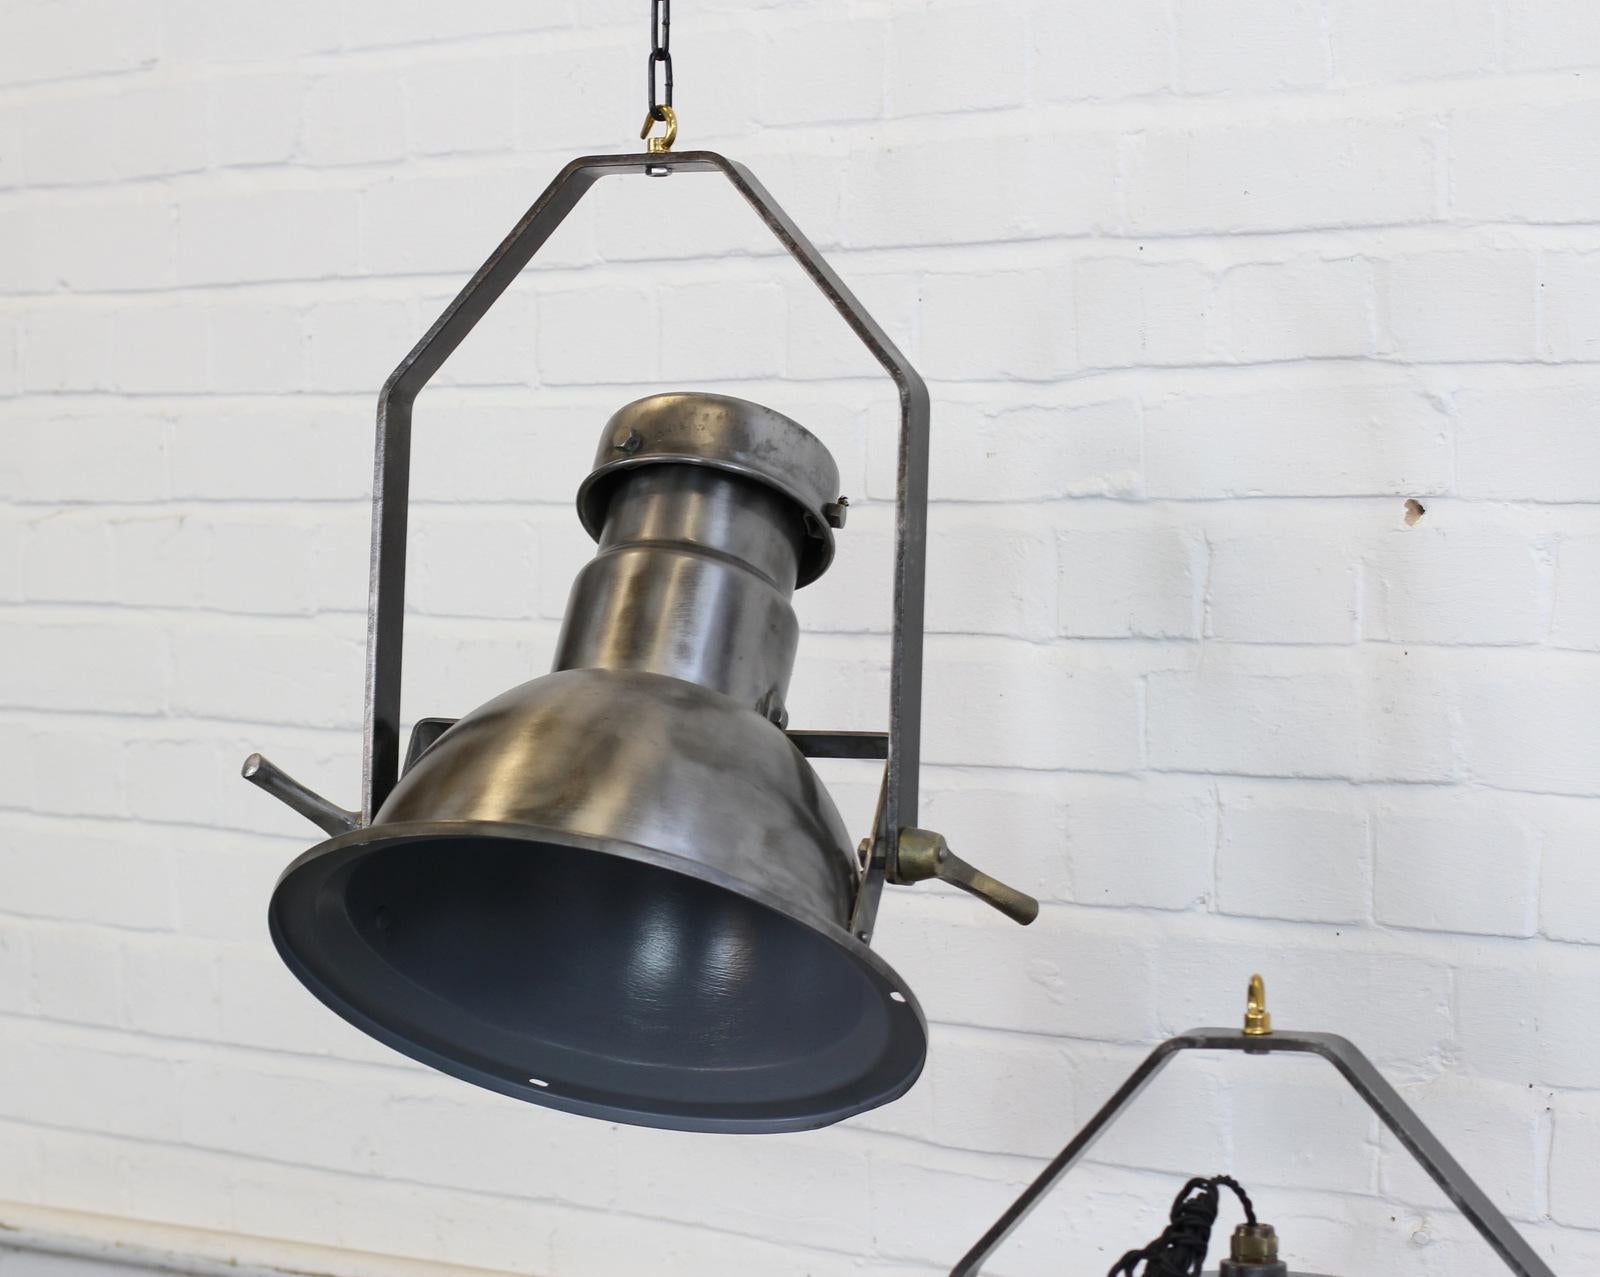 Industrial pendant lights by Holophane, circa 1950s.

- Price is per light
- Adjustable angle
- Steel shades and brackets
- Comes with 100cm of black twist flex 
- Comes with 100cm of suspension chain and ceiling hook
- Takes E27 fitting